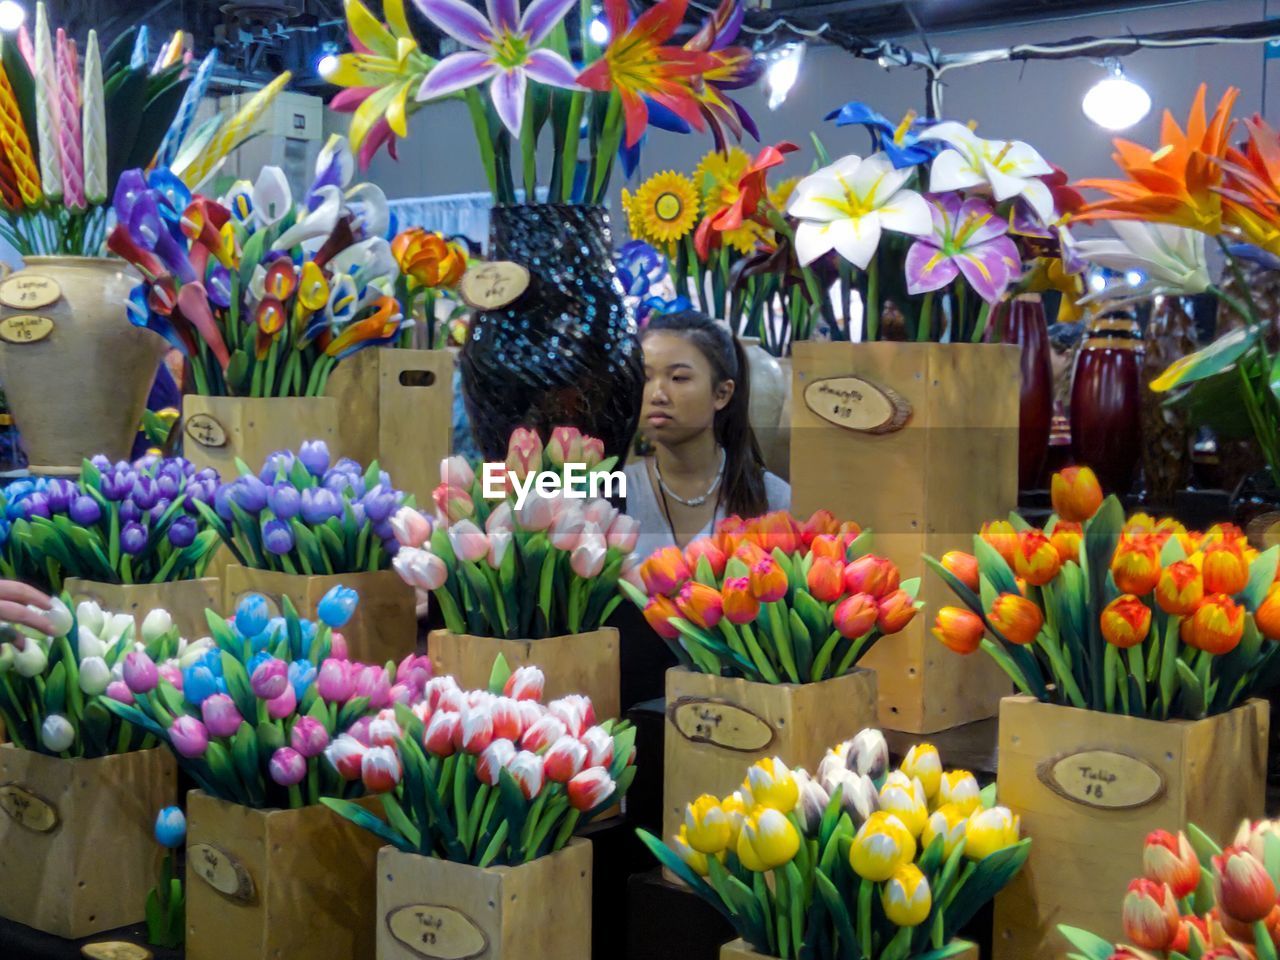 VARIOUS FLOWERS FOR SALE IN MARKET STALL